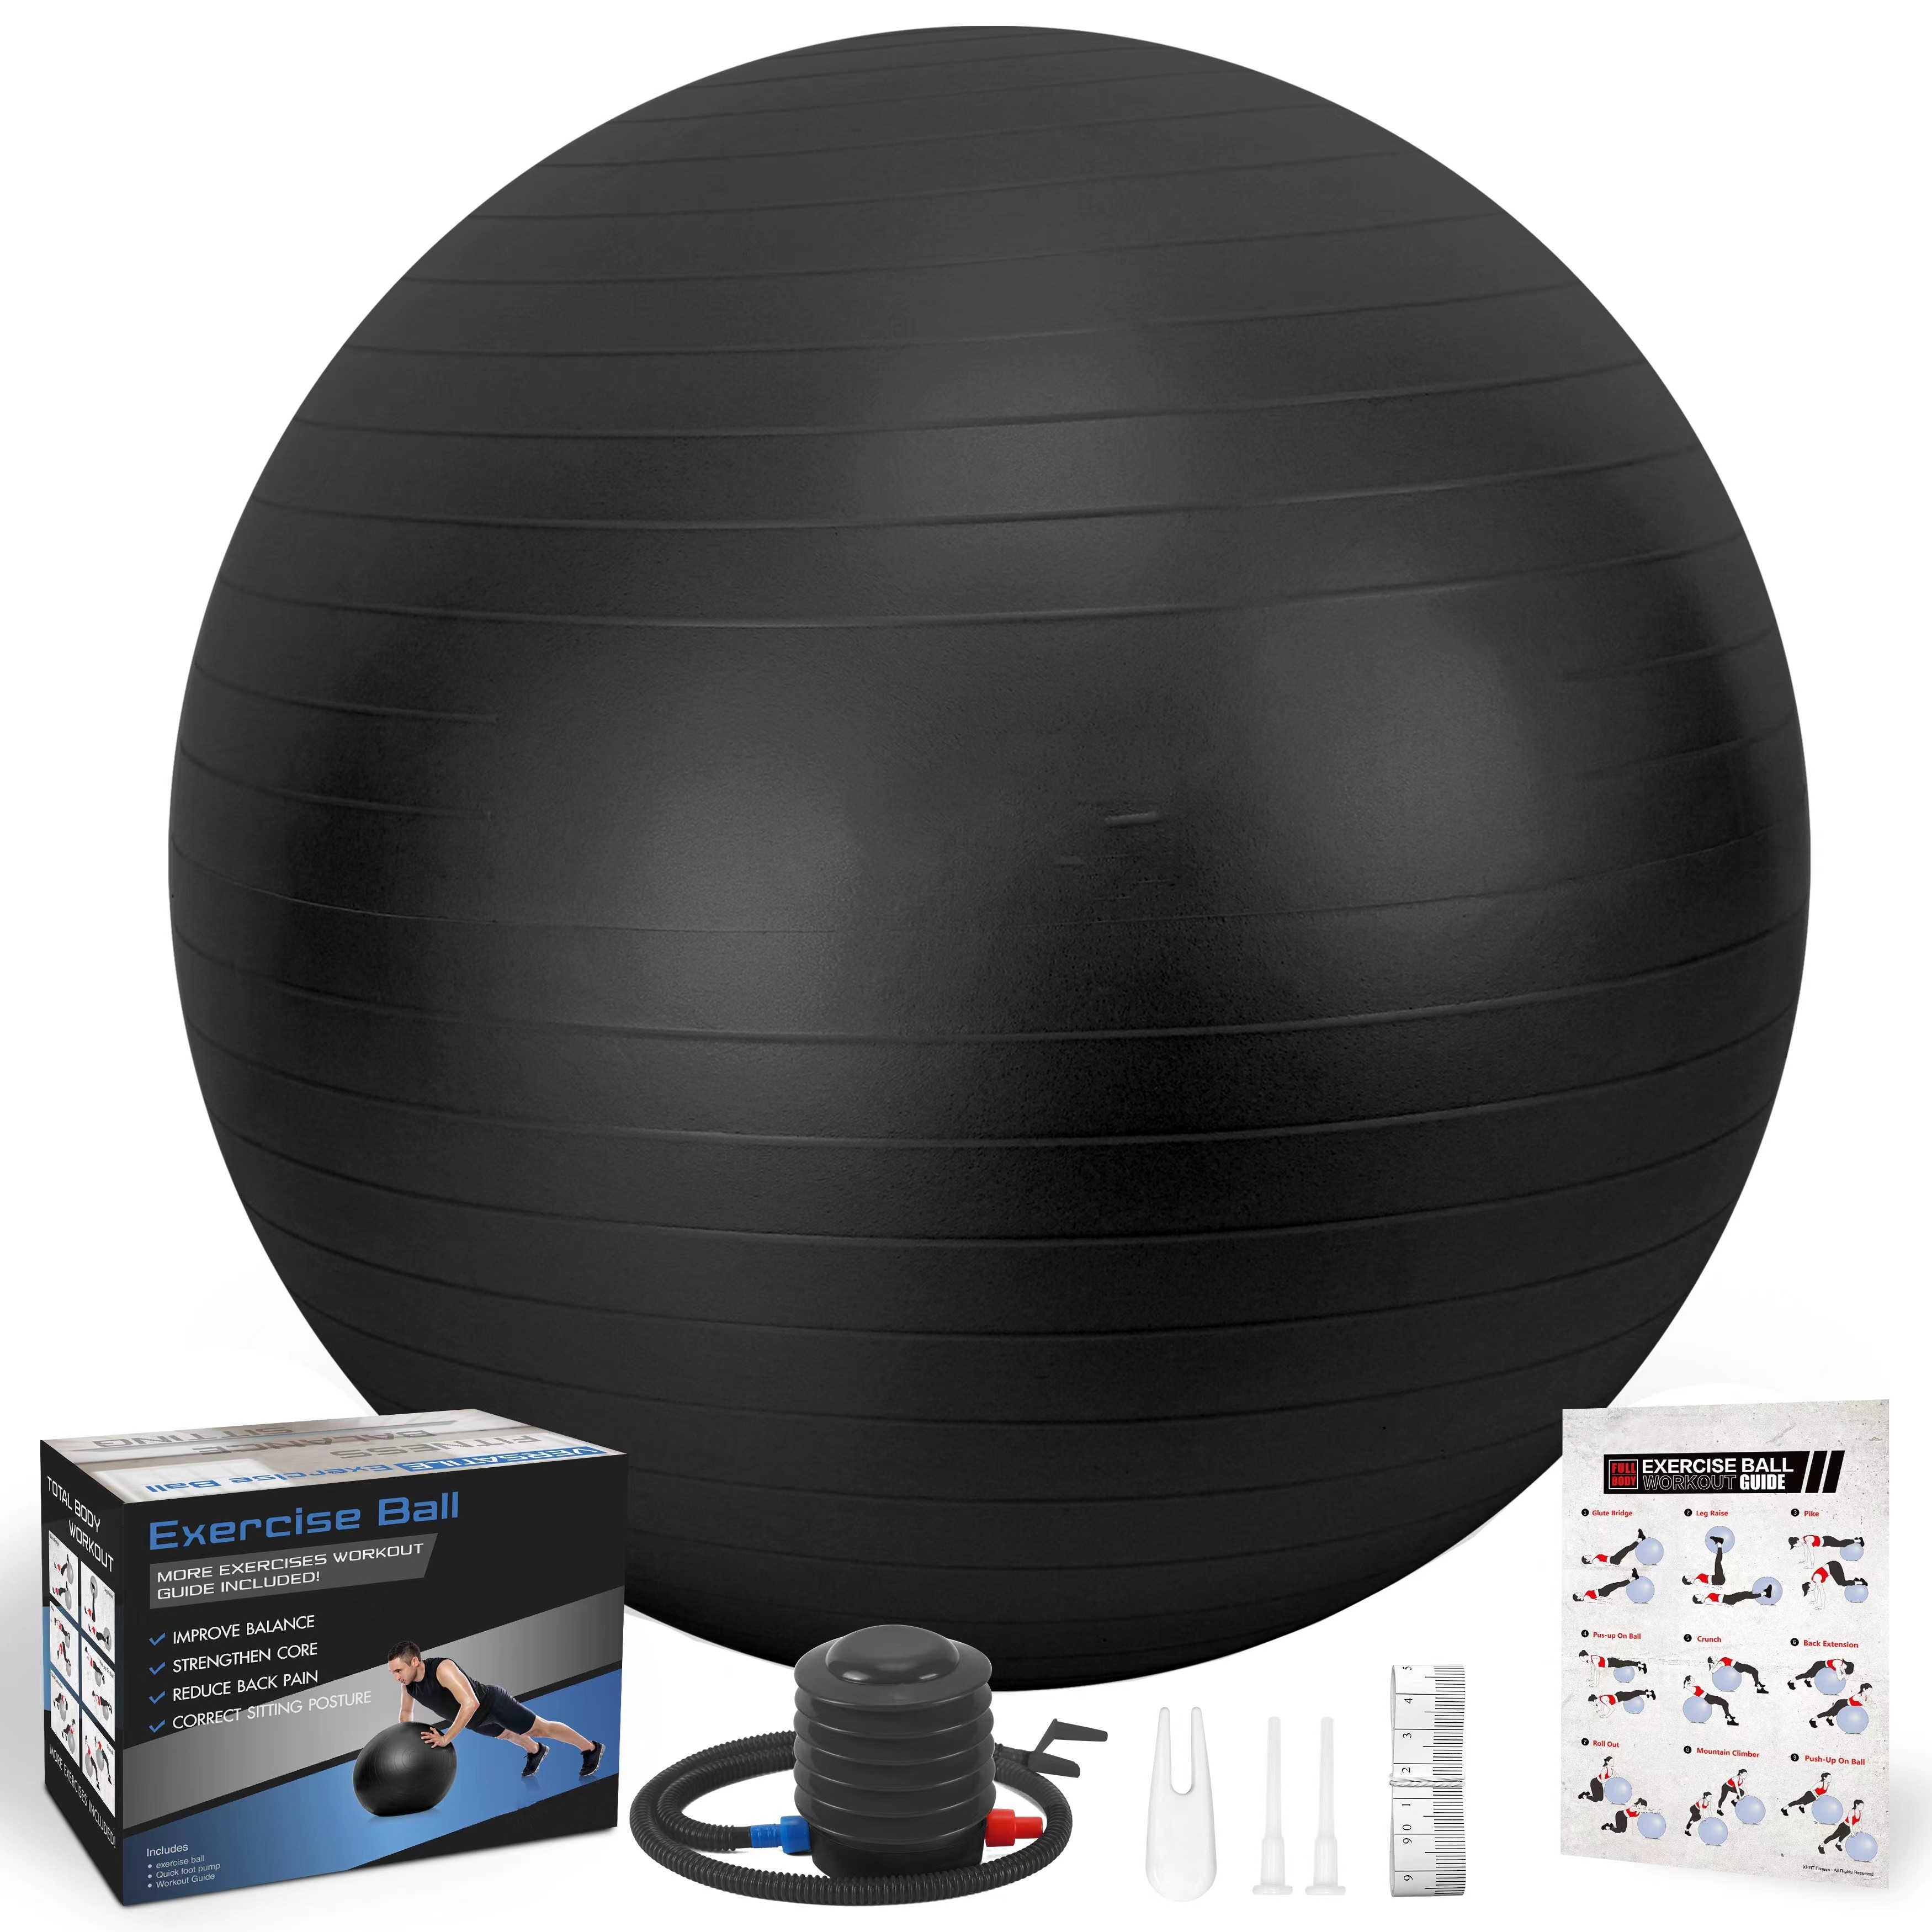 Black Exercise and Workout Ball, Yoga Ball Chair, Great for Fitness, Balance and Stability Extra-Thick with Quick Pump 